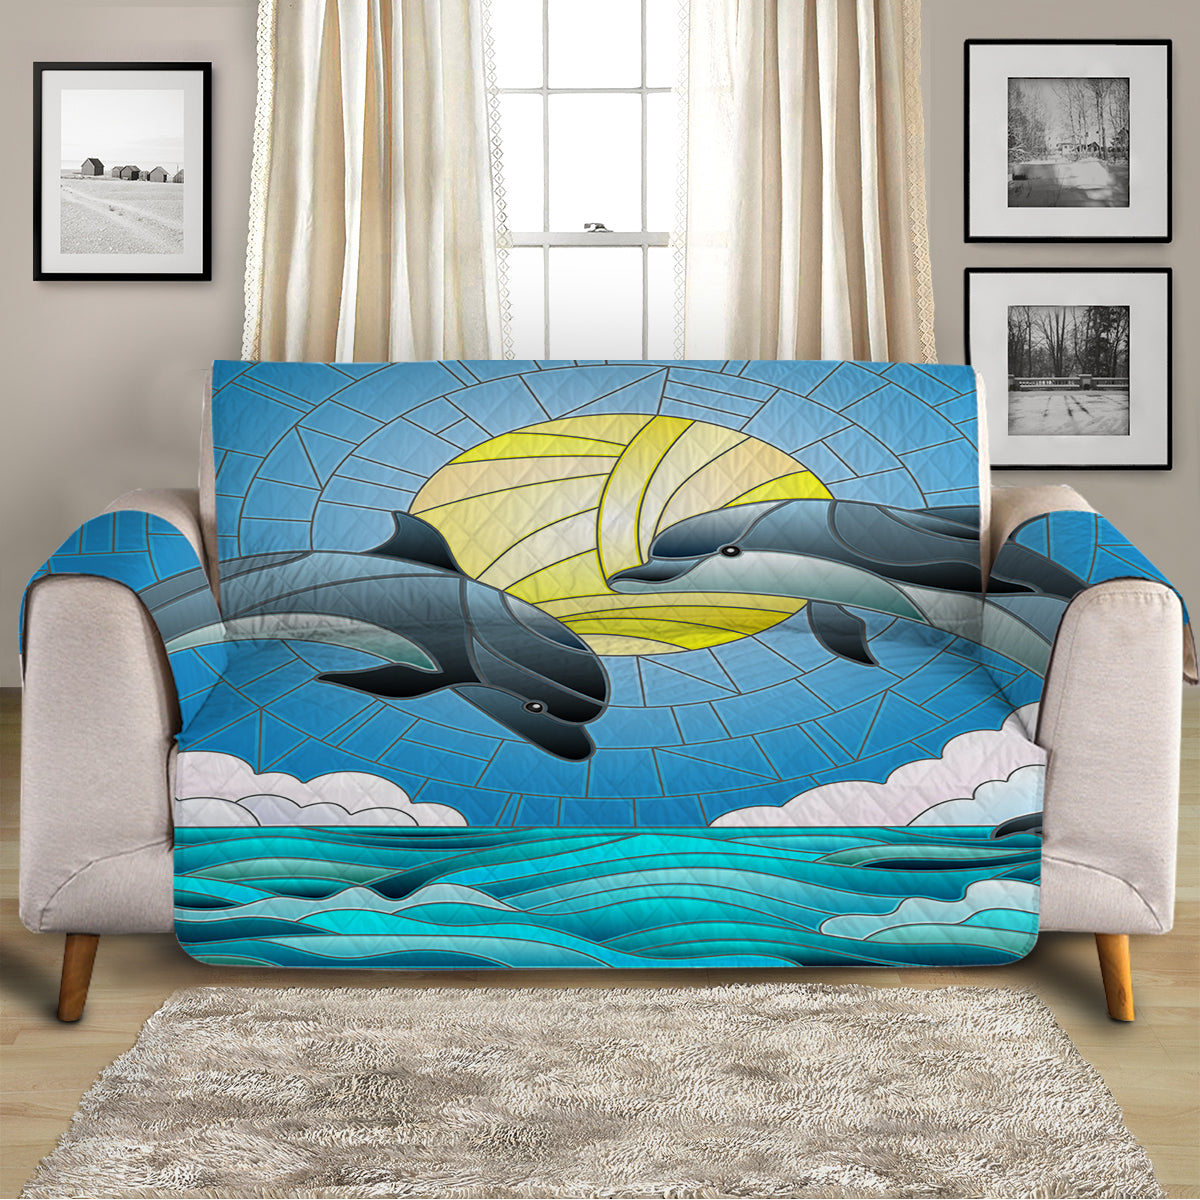 dolphins-quilted-couch-cover-protector-coastal-passion_5_2000x.jpg